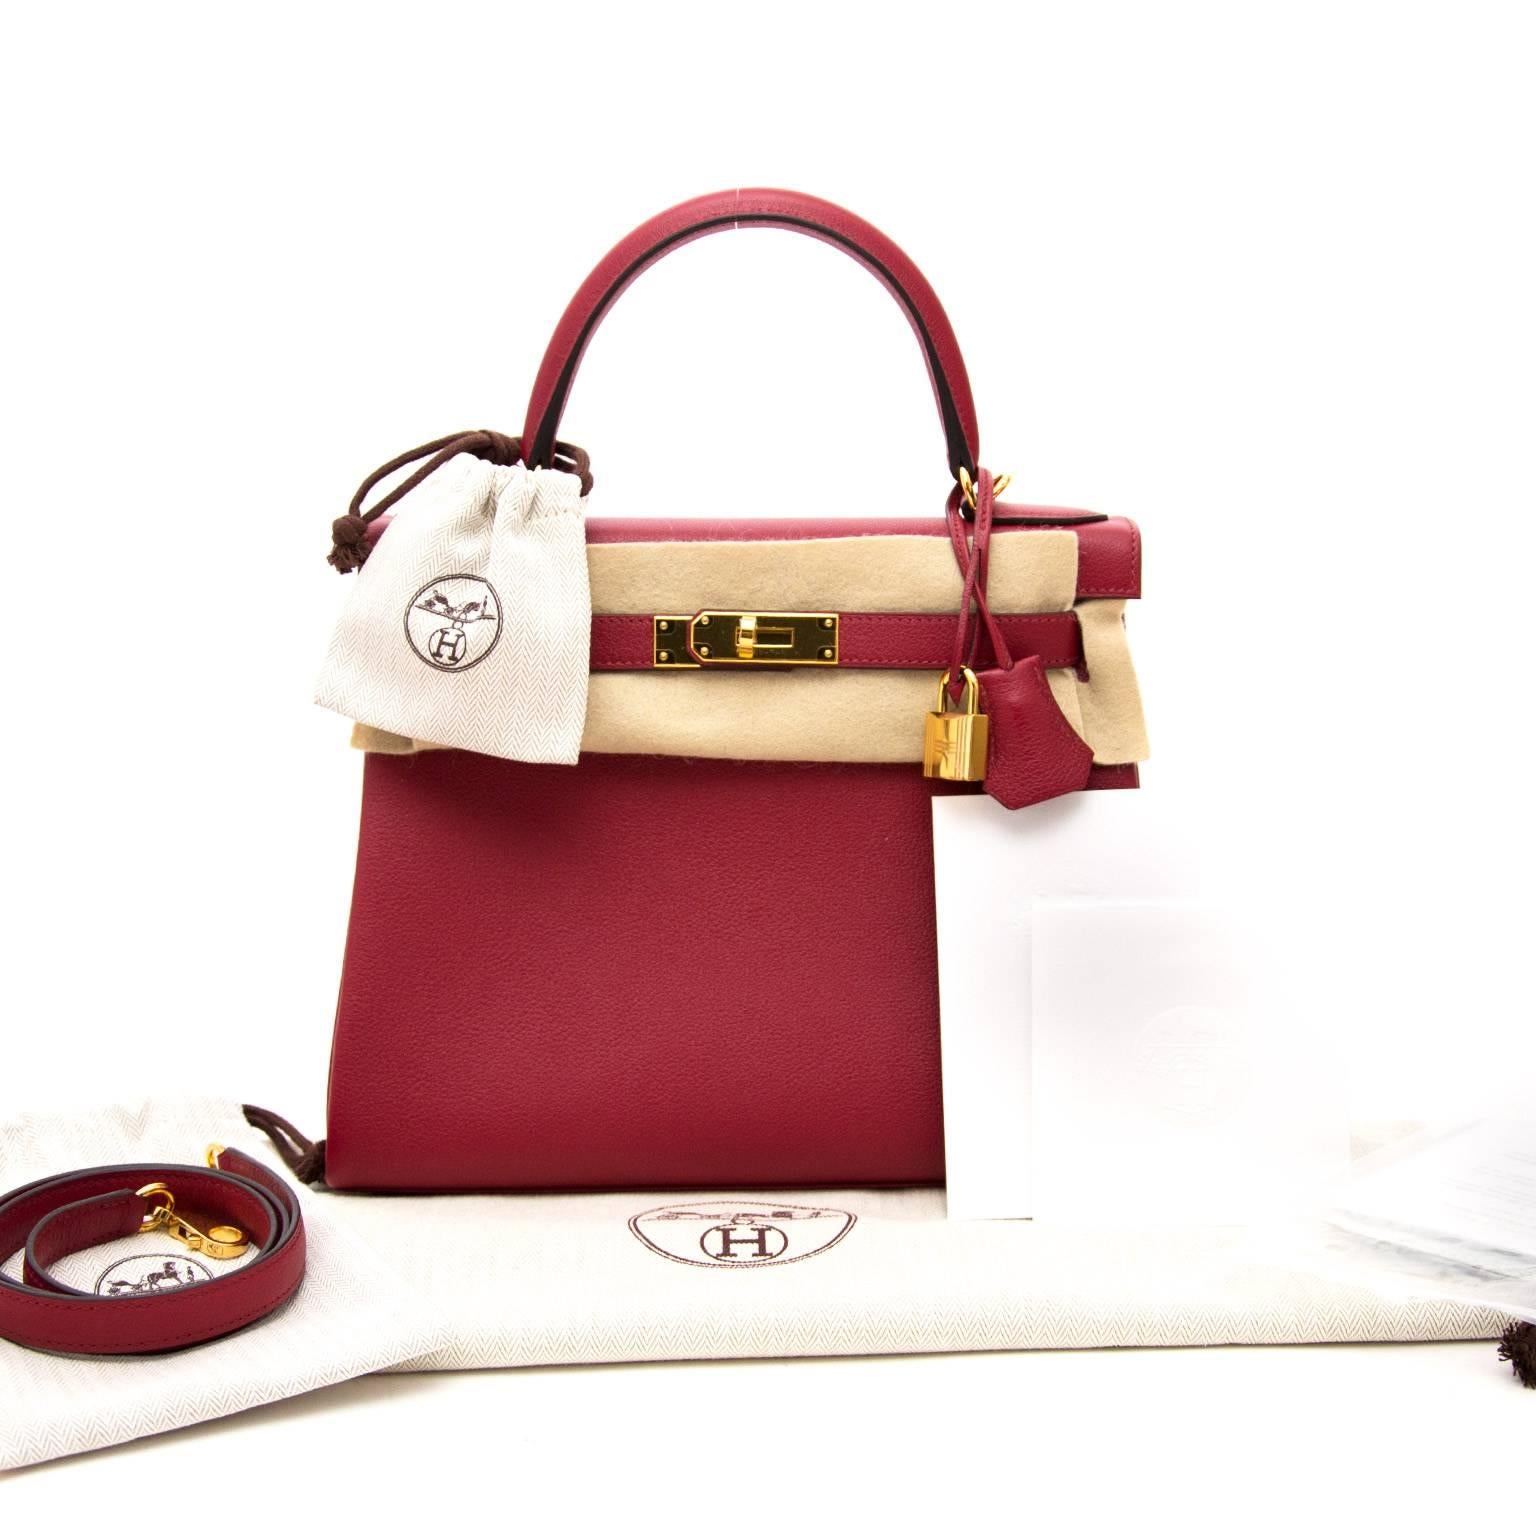 This is a brand new, storefresh Hermès Kelly Retourne 28cm Evercolor Rouge Grenat Evercolor Leather is known for it's fair firmness and it's matte texture.

The golden hardware and deep dark red color make a perfect match. Skip the